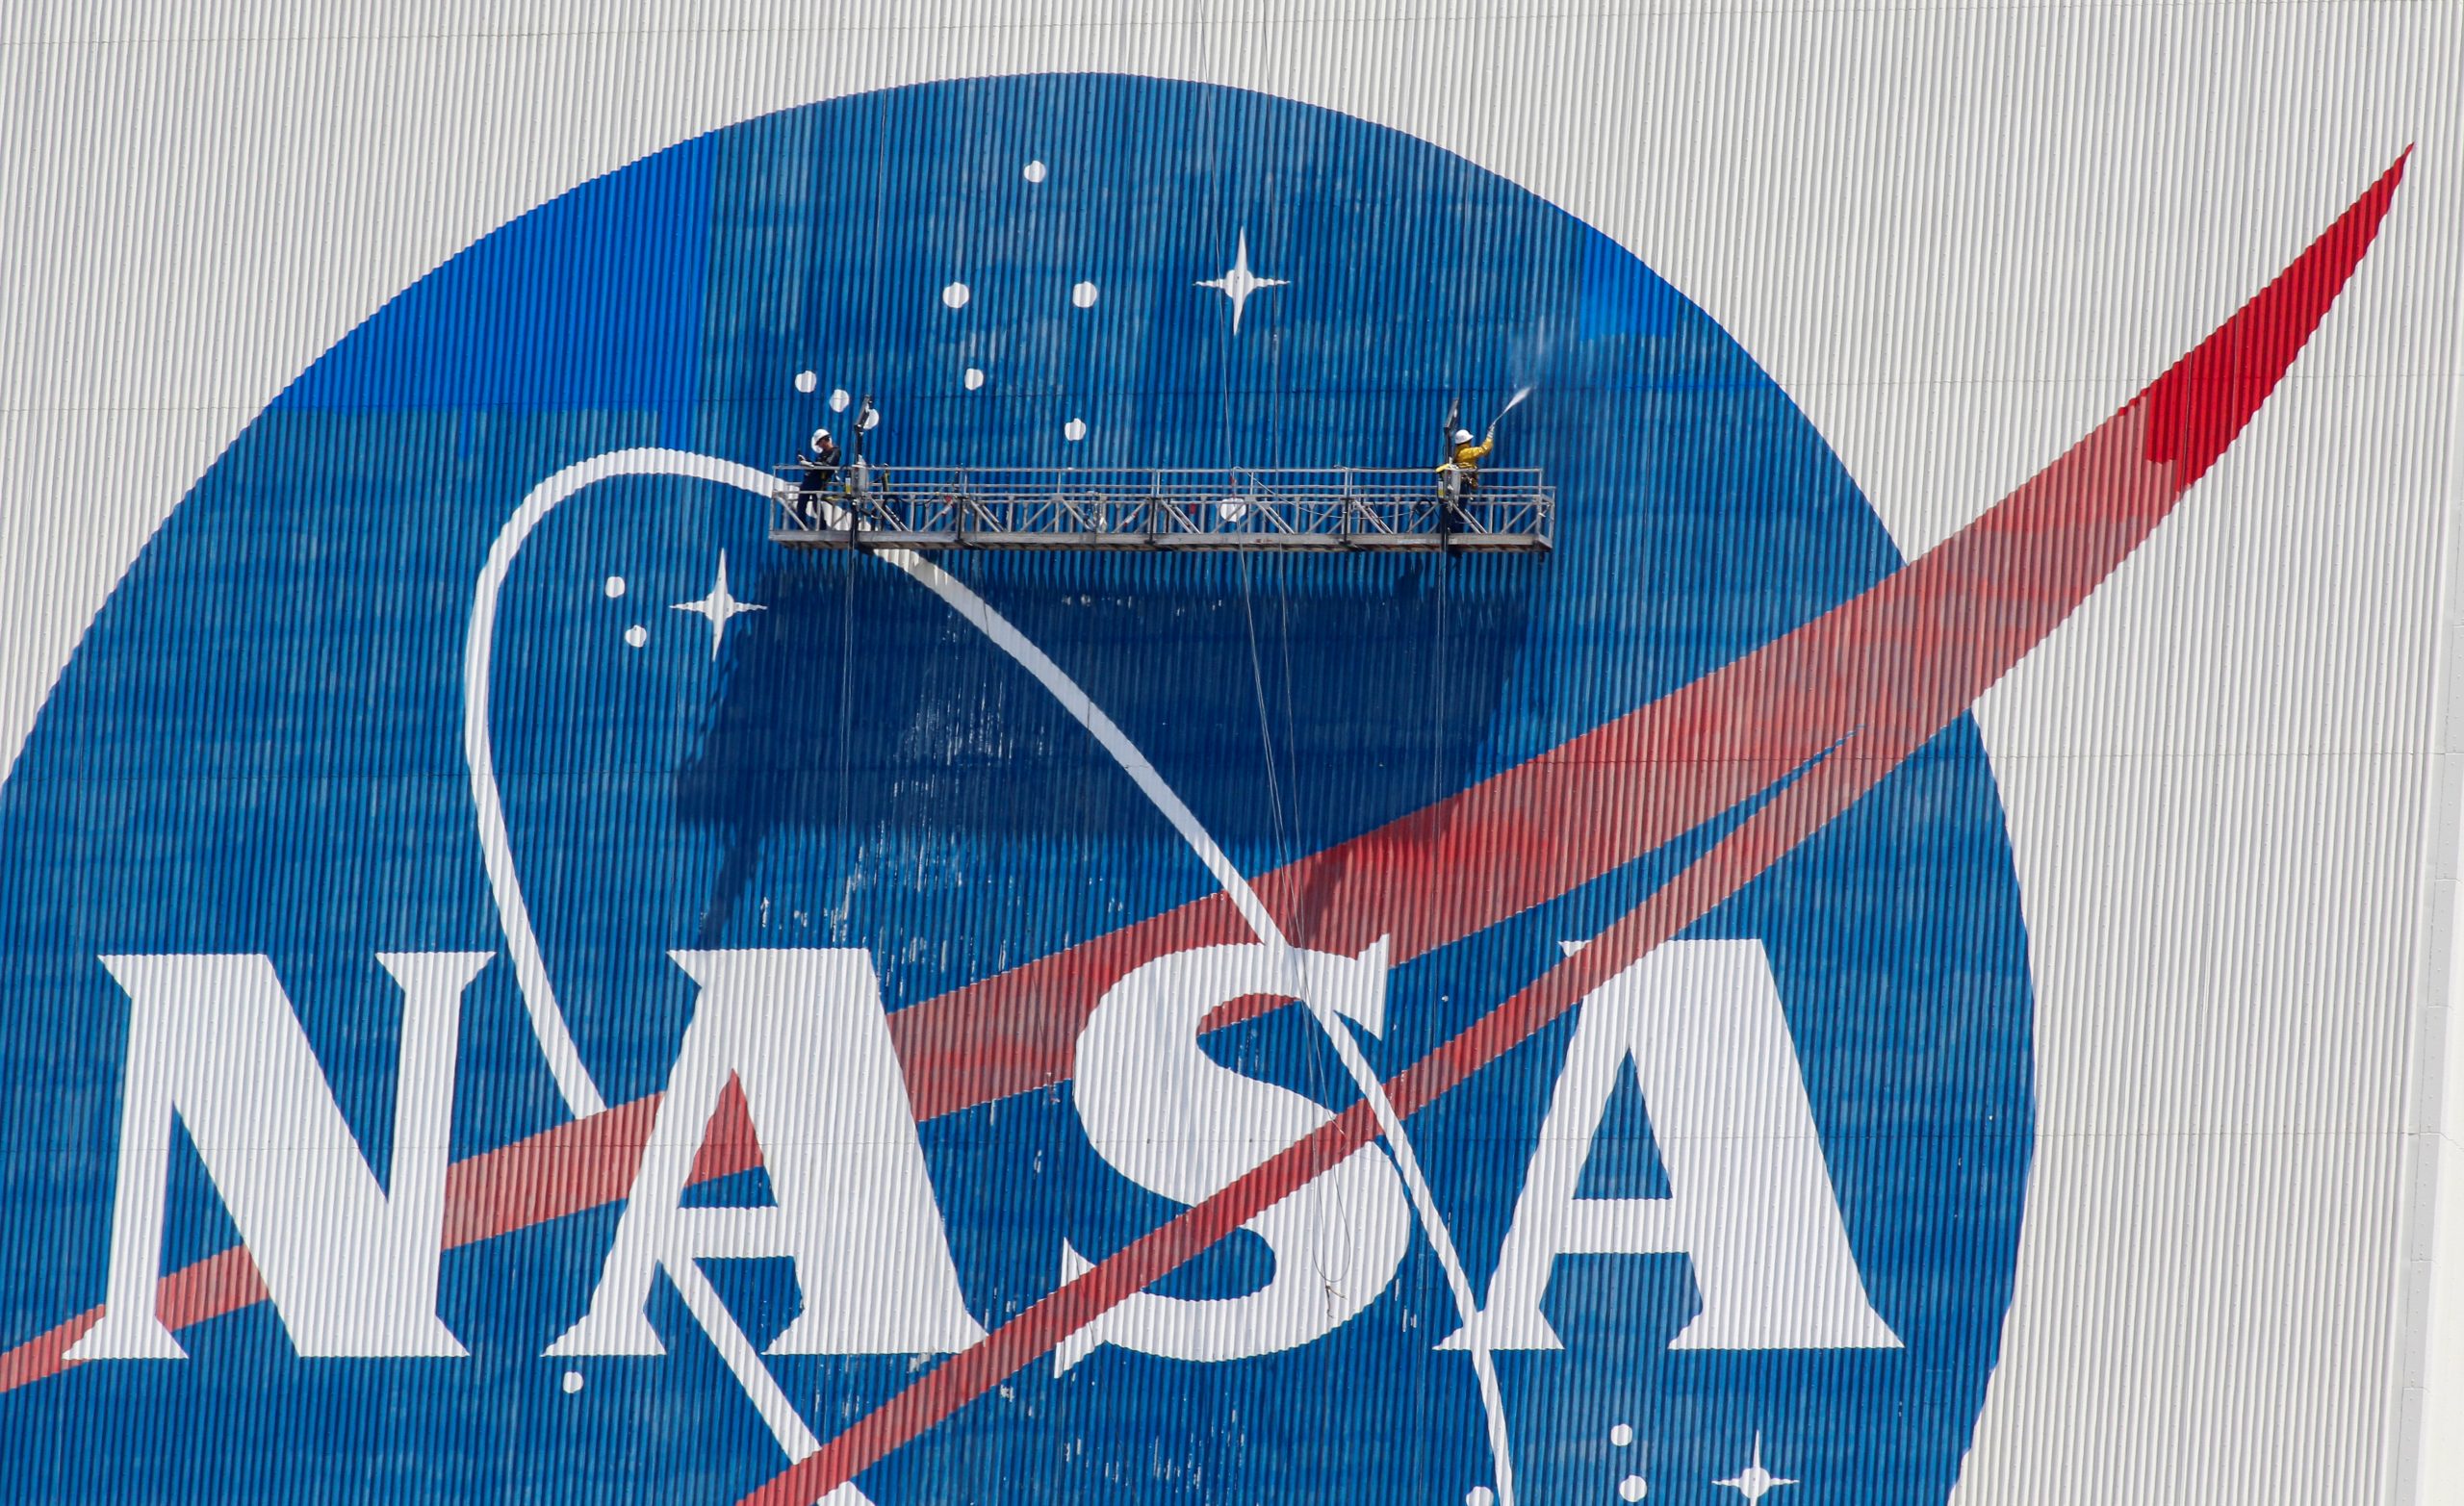 Workers pressure wash the logo of NASA on the Vehicle Assembly Building, in Cape Canaveral Workers pressure wash the logo of NASA on the Vehicle Assembly Building before SpaceX will send two NASA astronauts to the International Space Station aboard its Falcon 9 rocket, at the Kennedy Space Center in Cape Canaveral, Florida, U.S., May 19, 2020. REUTERS/Joe Skipper JOE SKIPPER